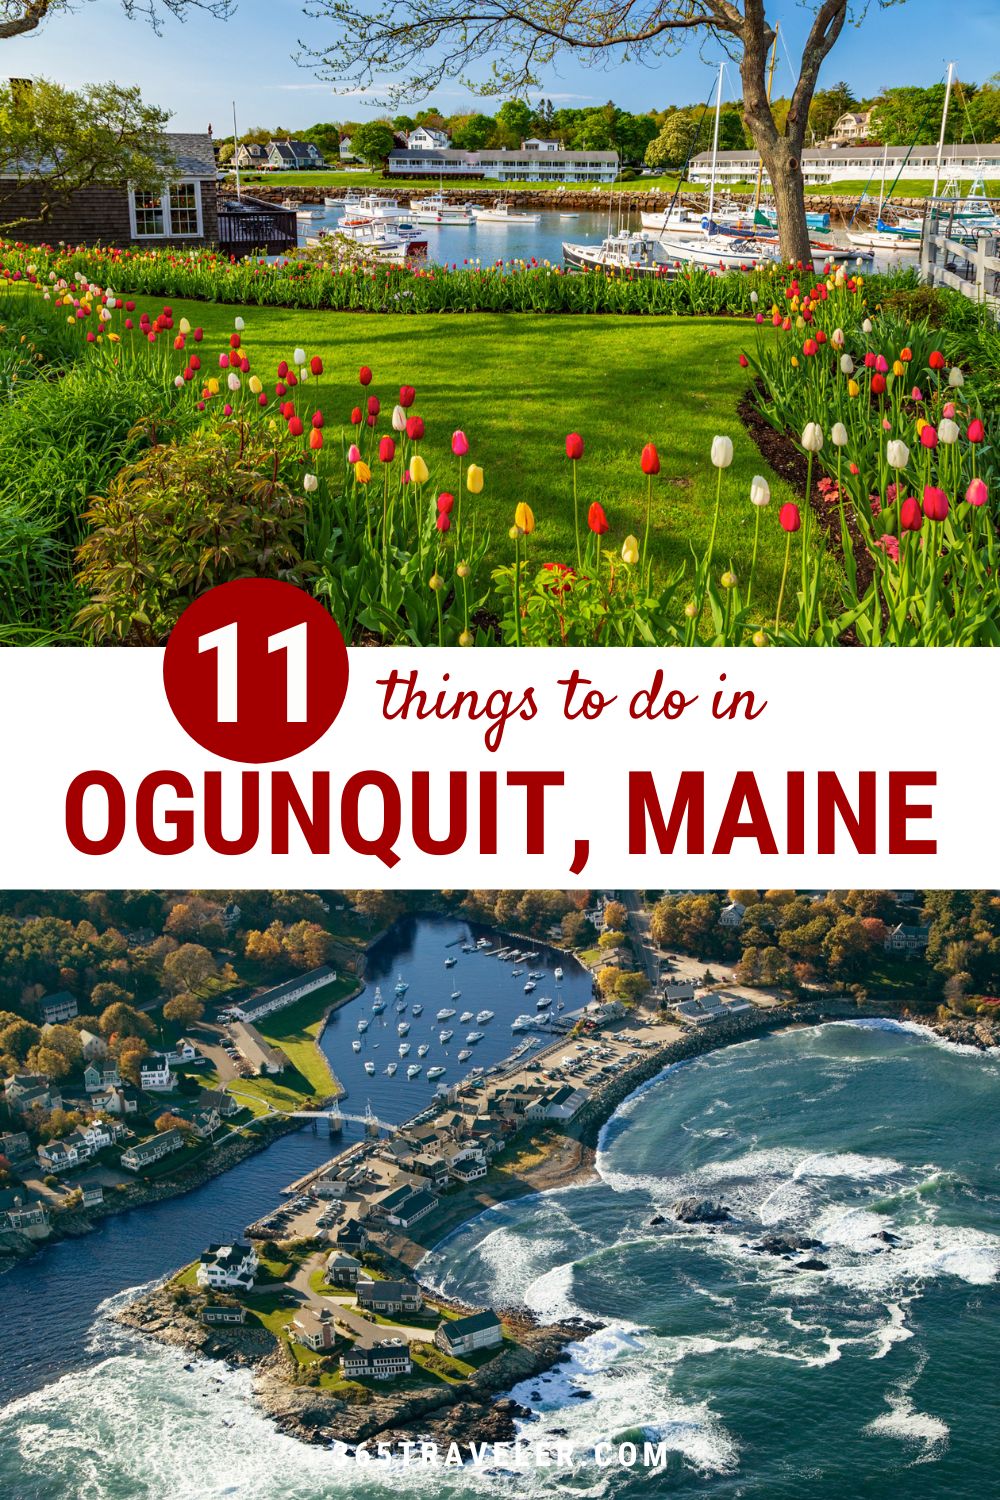 11 REALLY AMAZING THINGS TO DO IN OGUNQUIT MAINE